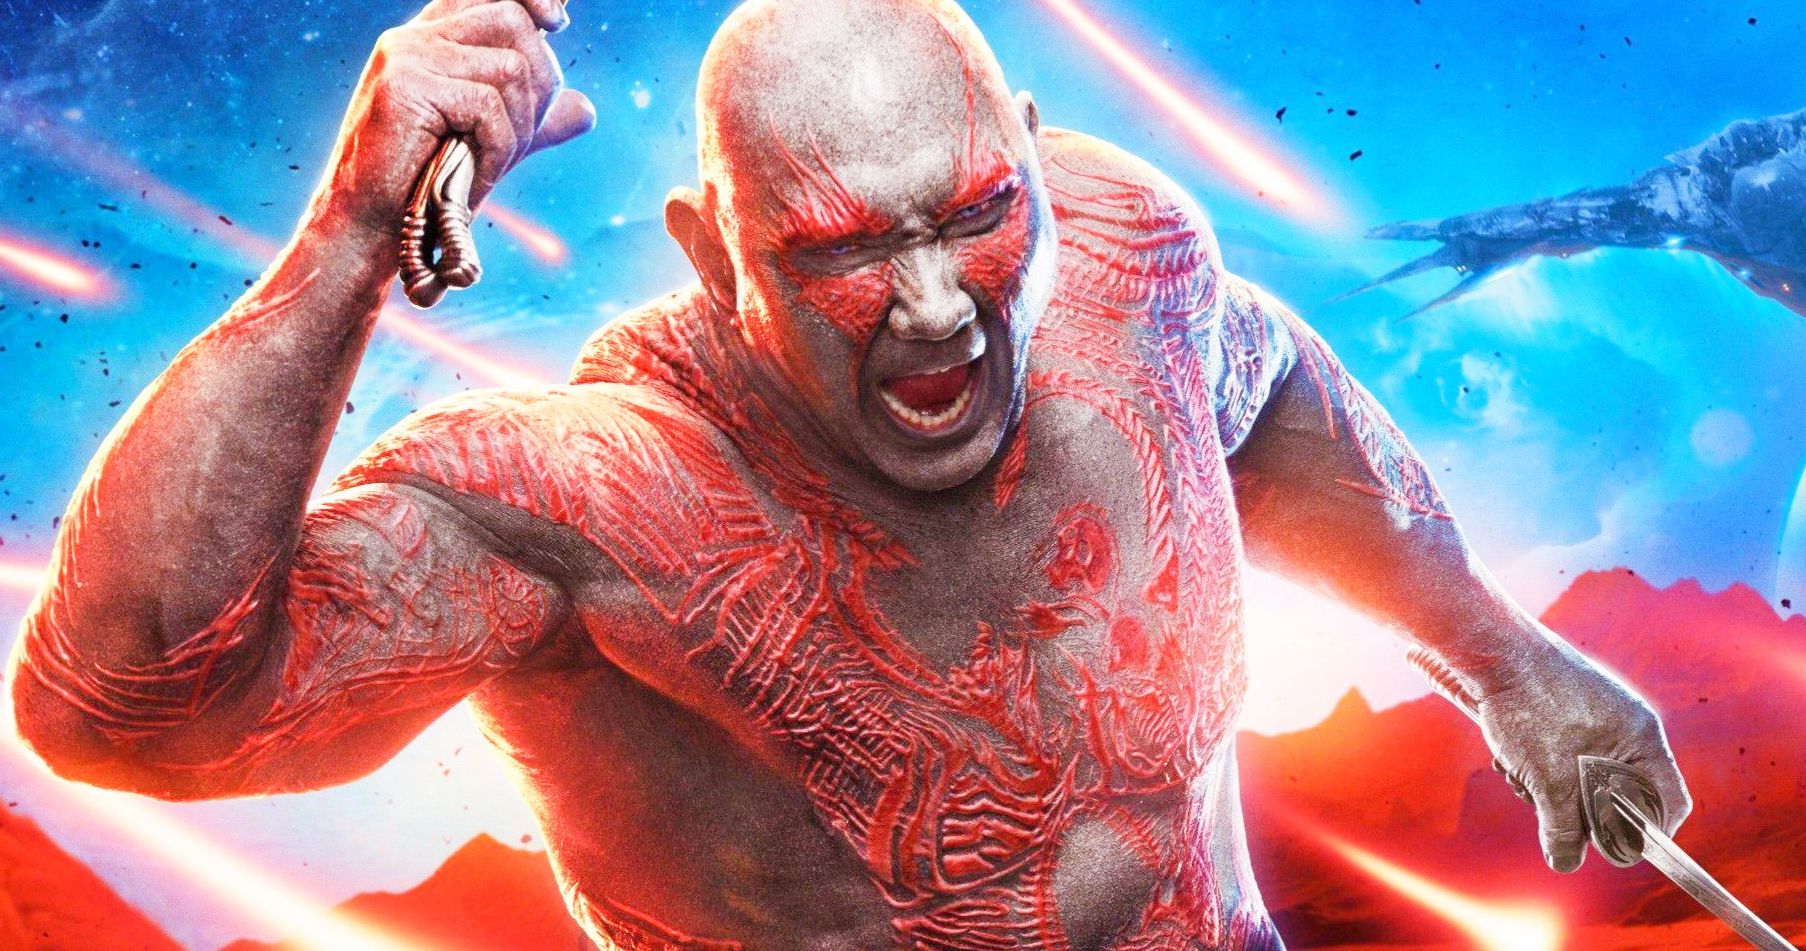 Dave Bautista Says Marvel Dropped the Ball on Drax's Origin Story